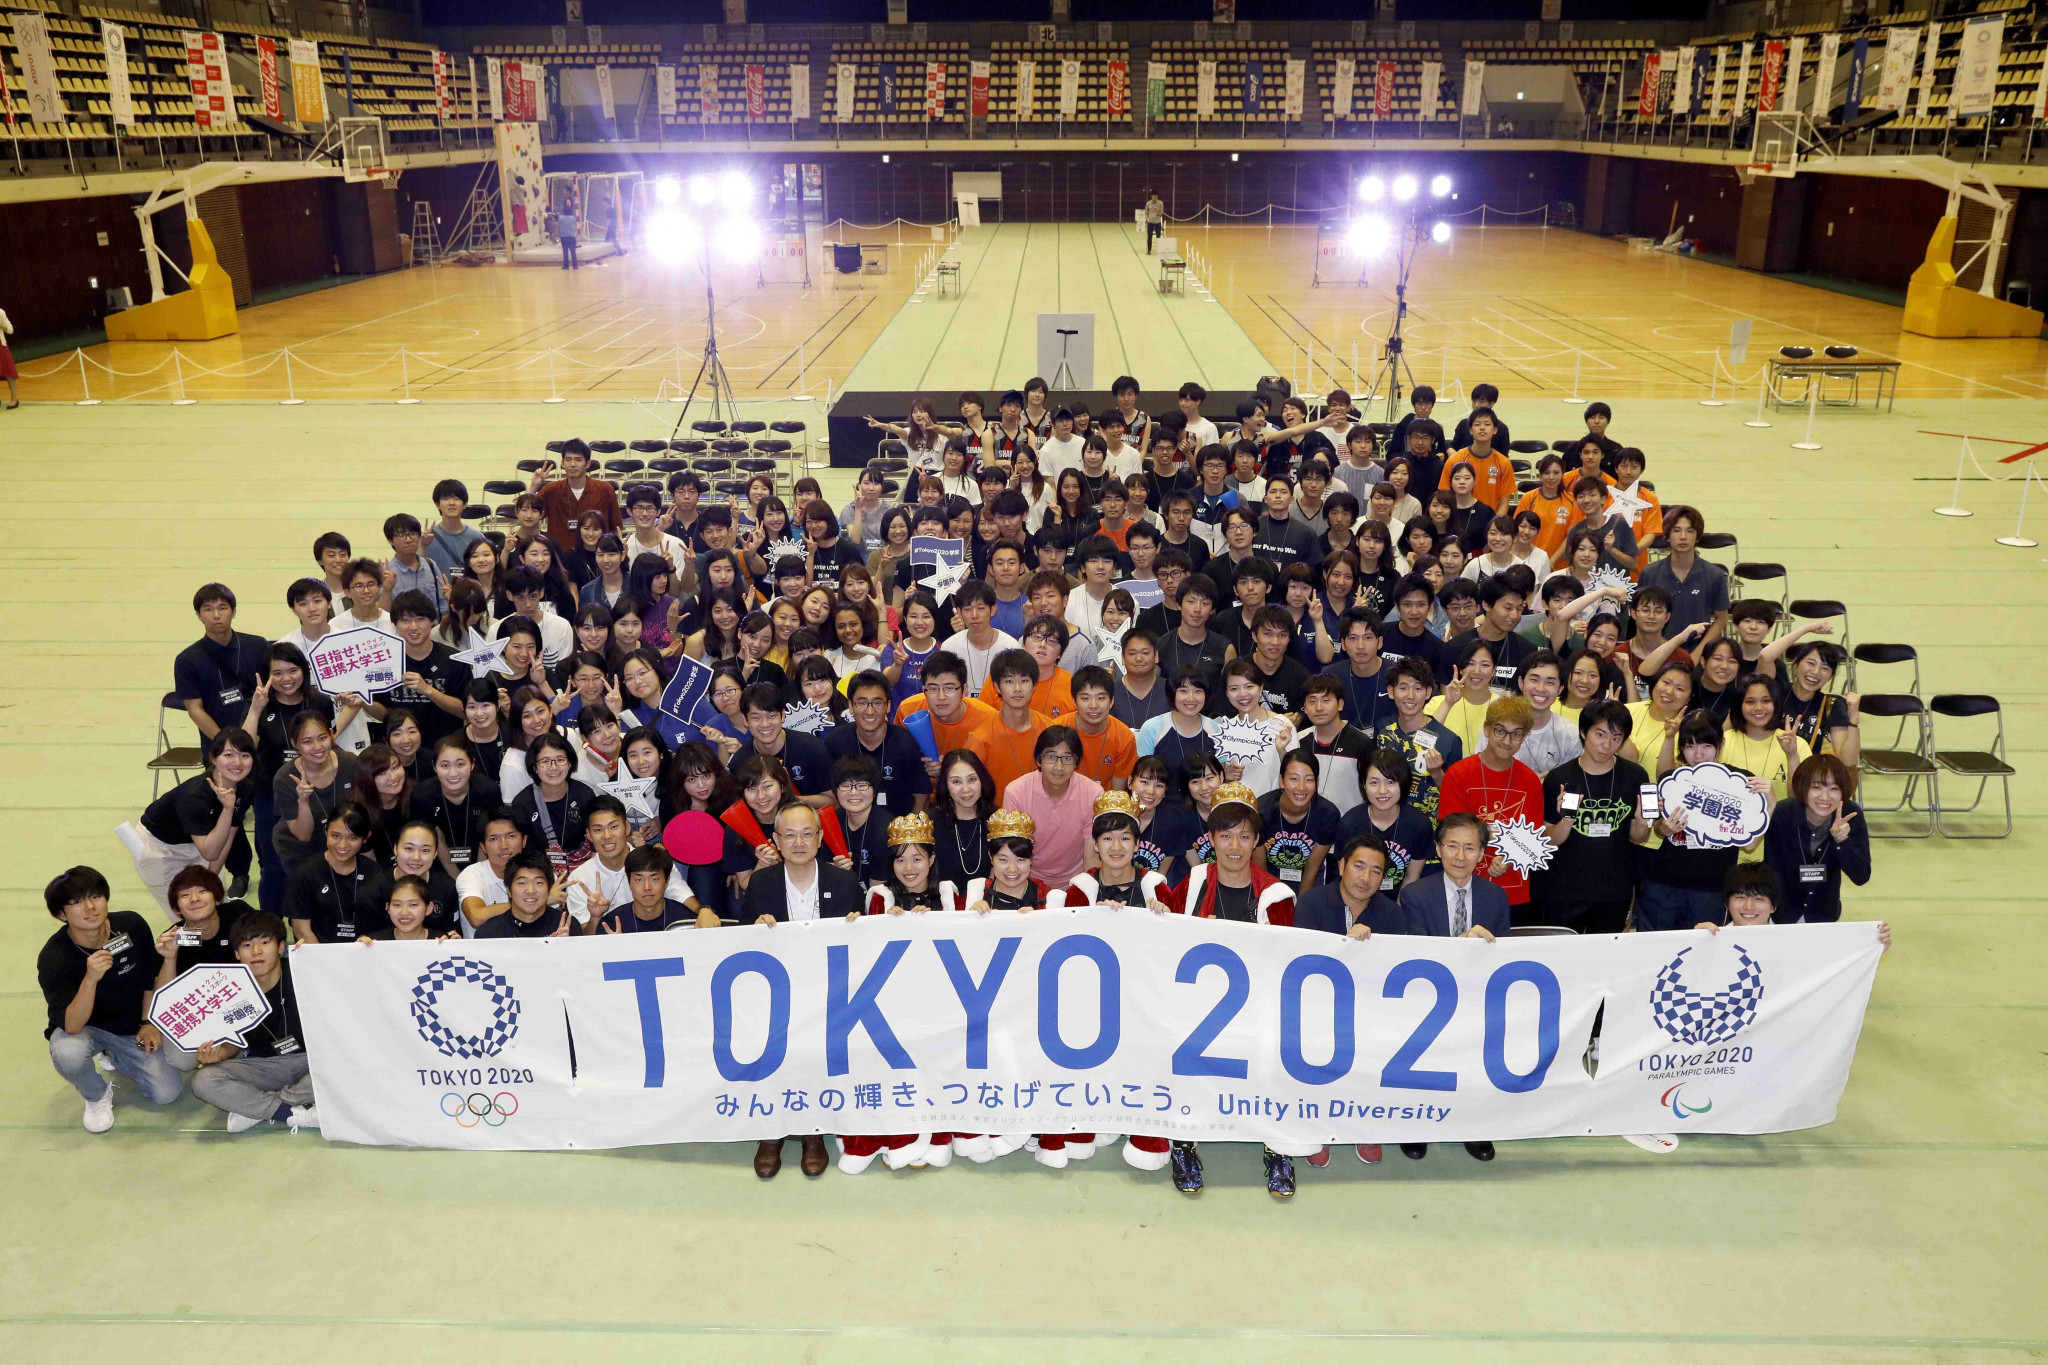 Tokyo 2020 were among upcoming Organising Committees to have celebrated Olympic Day ©Tokyo 2020